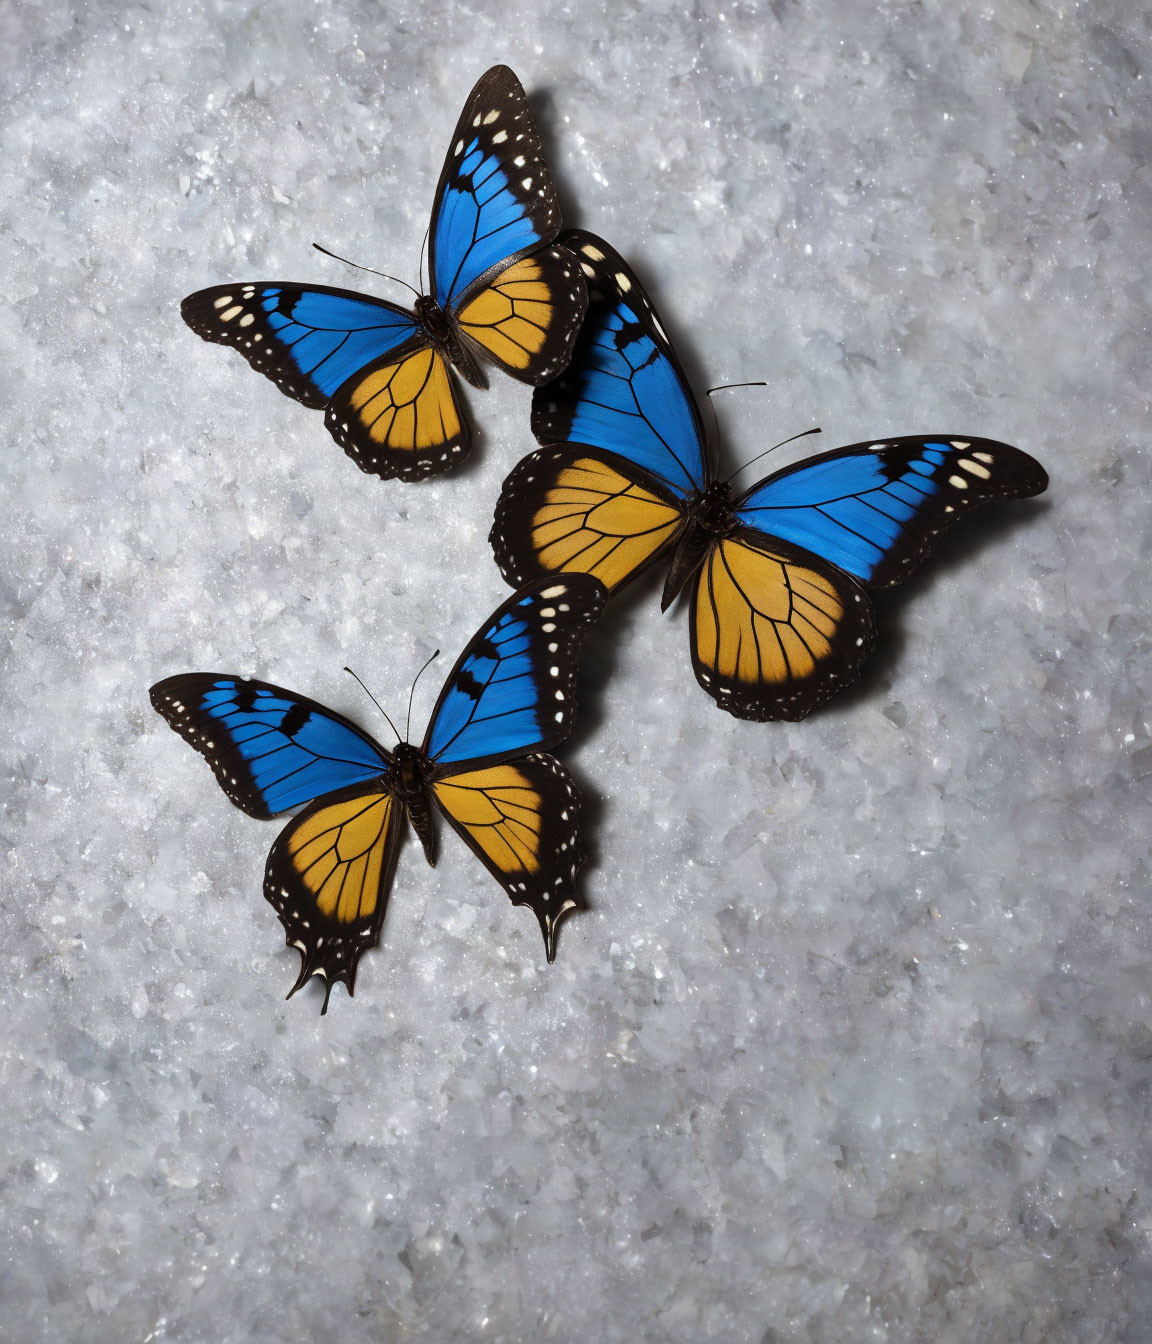 Three Blue and Orange Butterflies on White Crystalline Surface